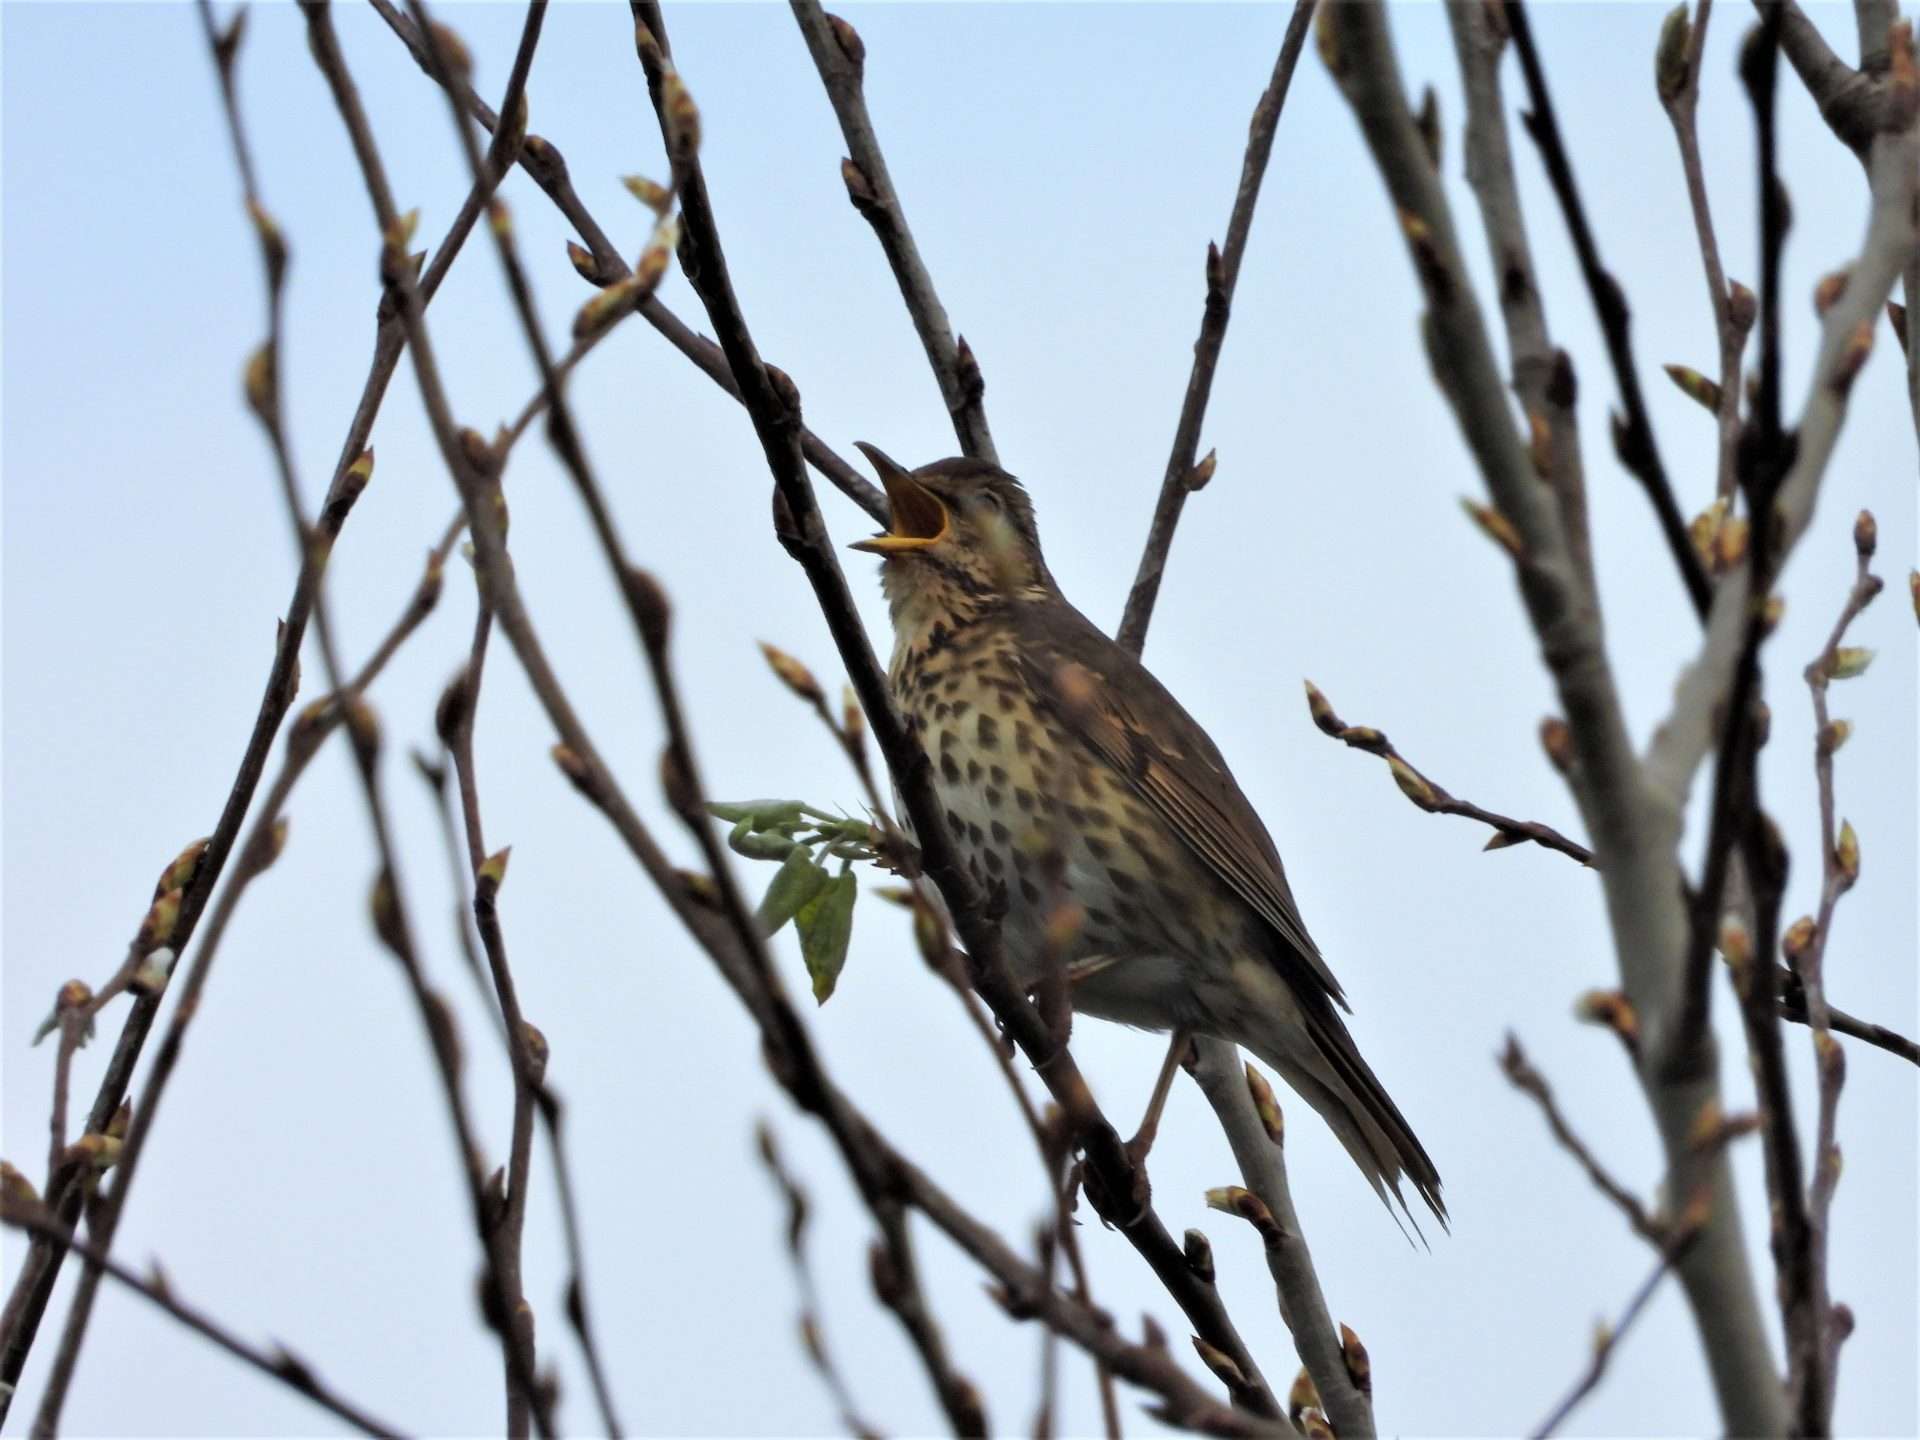 Song Thrush by Kenneth Bradley at Matford Marshes RSPB